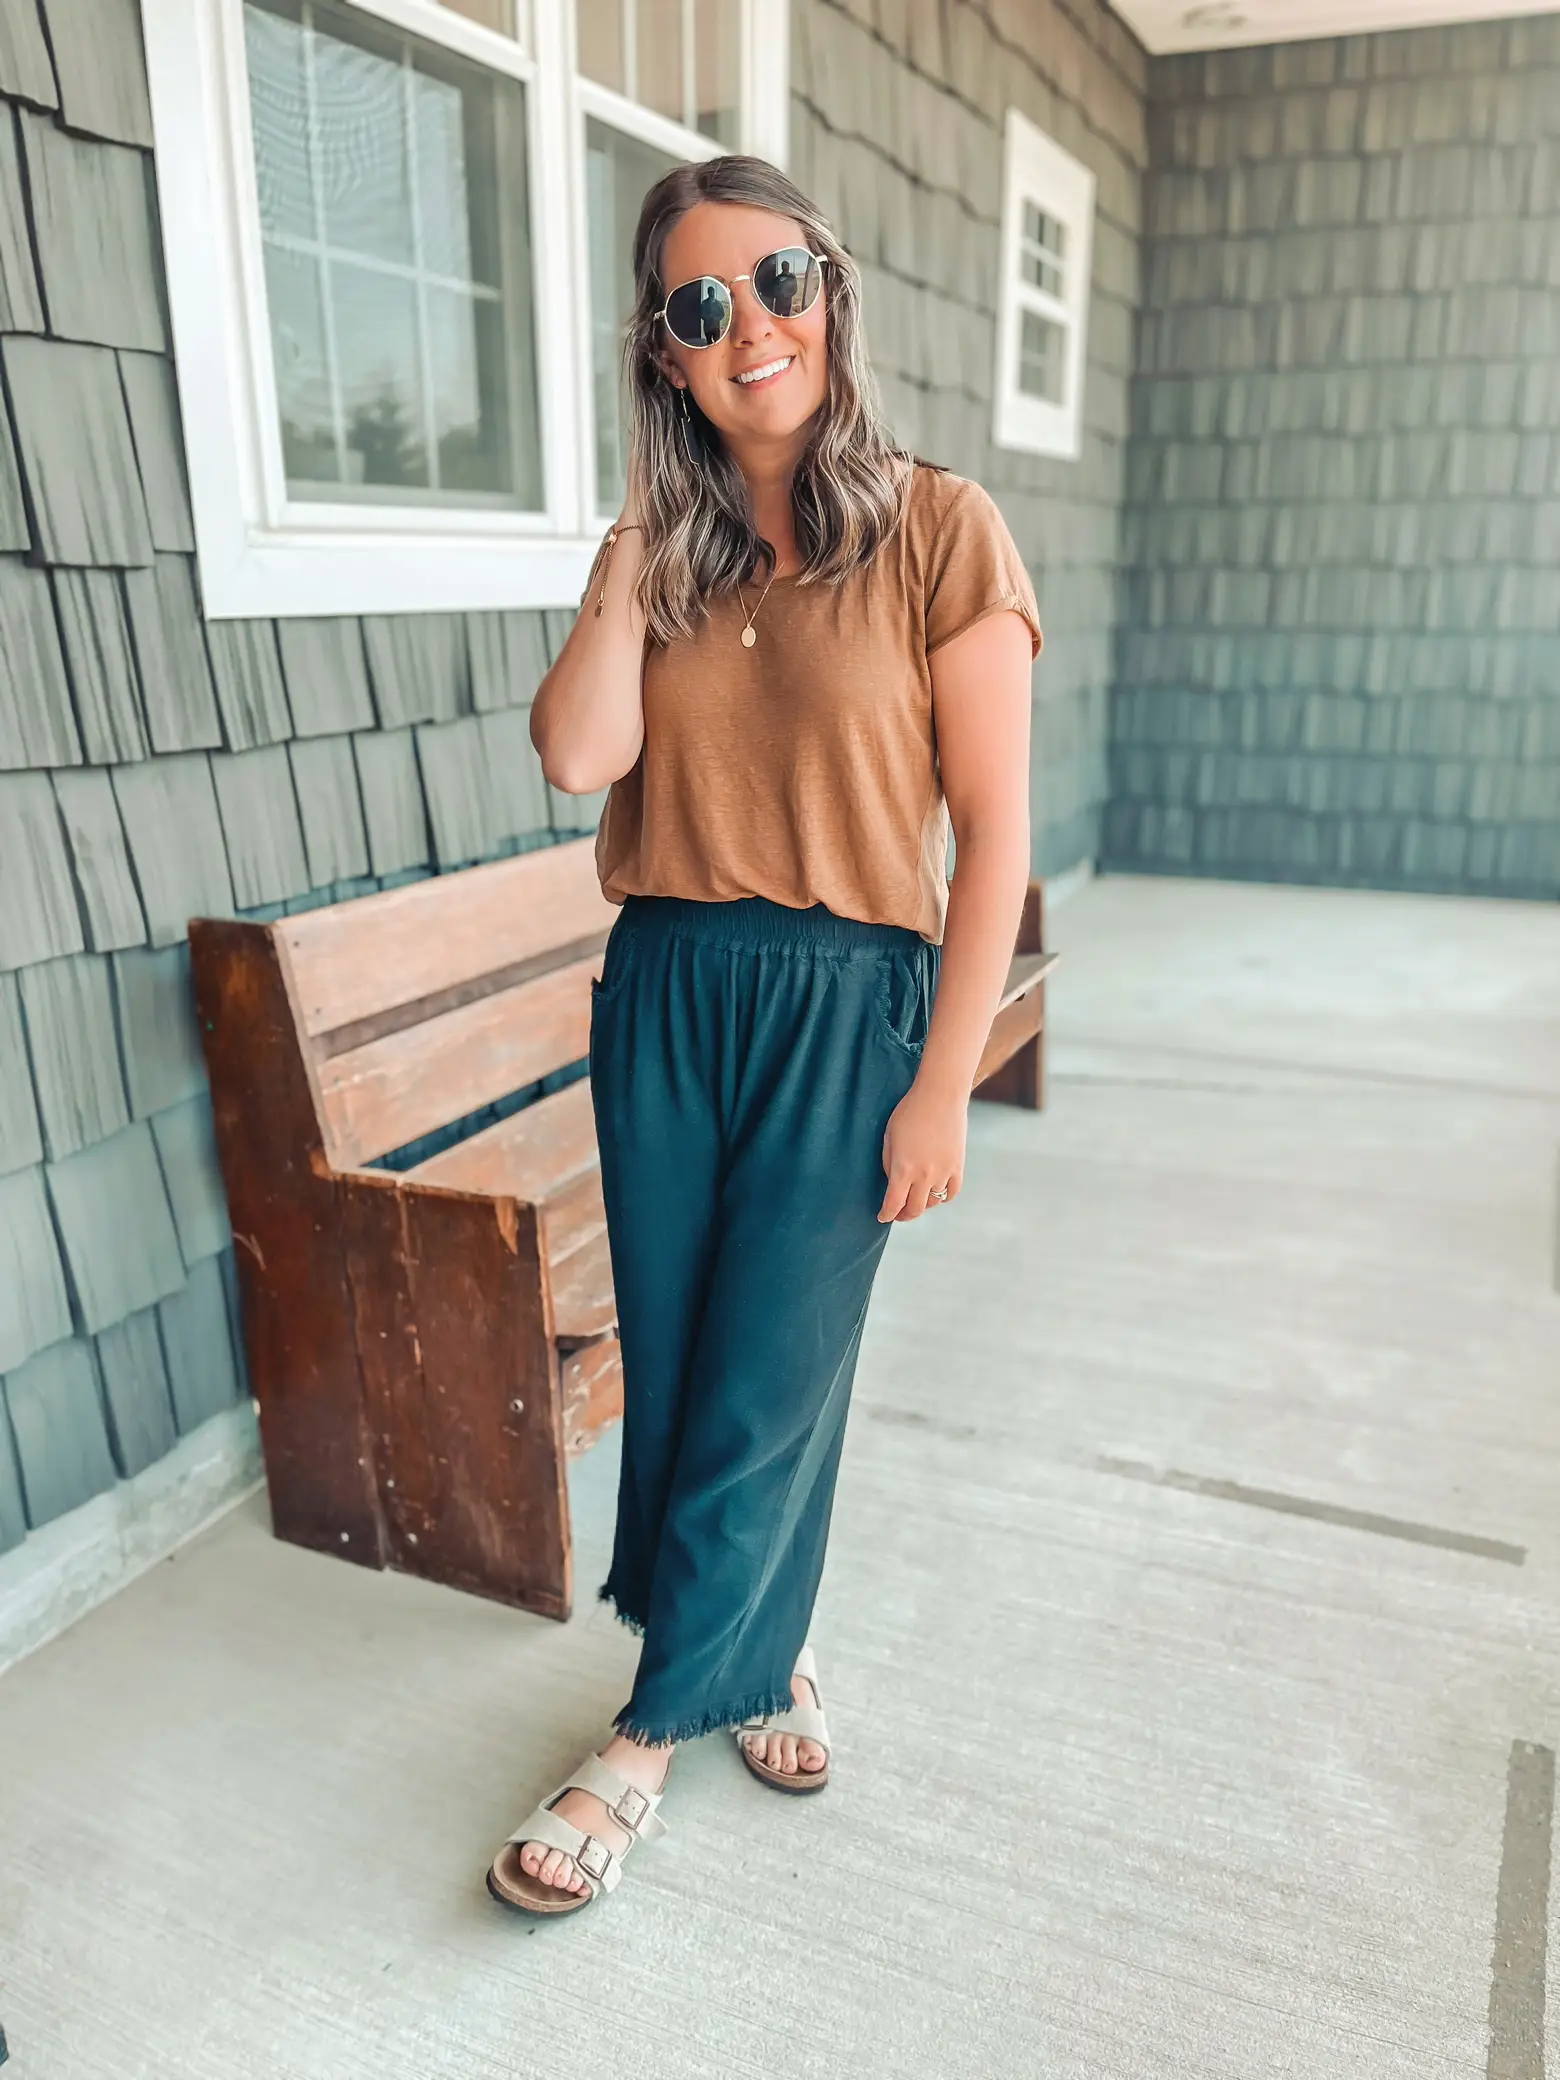 Dark Brown Pants Outfits For Women (133 ideas & outfits)